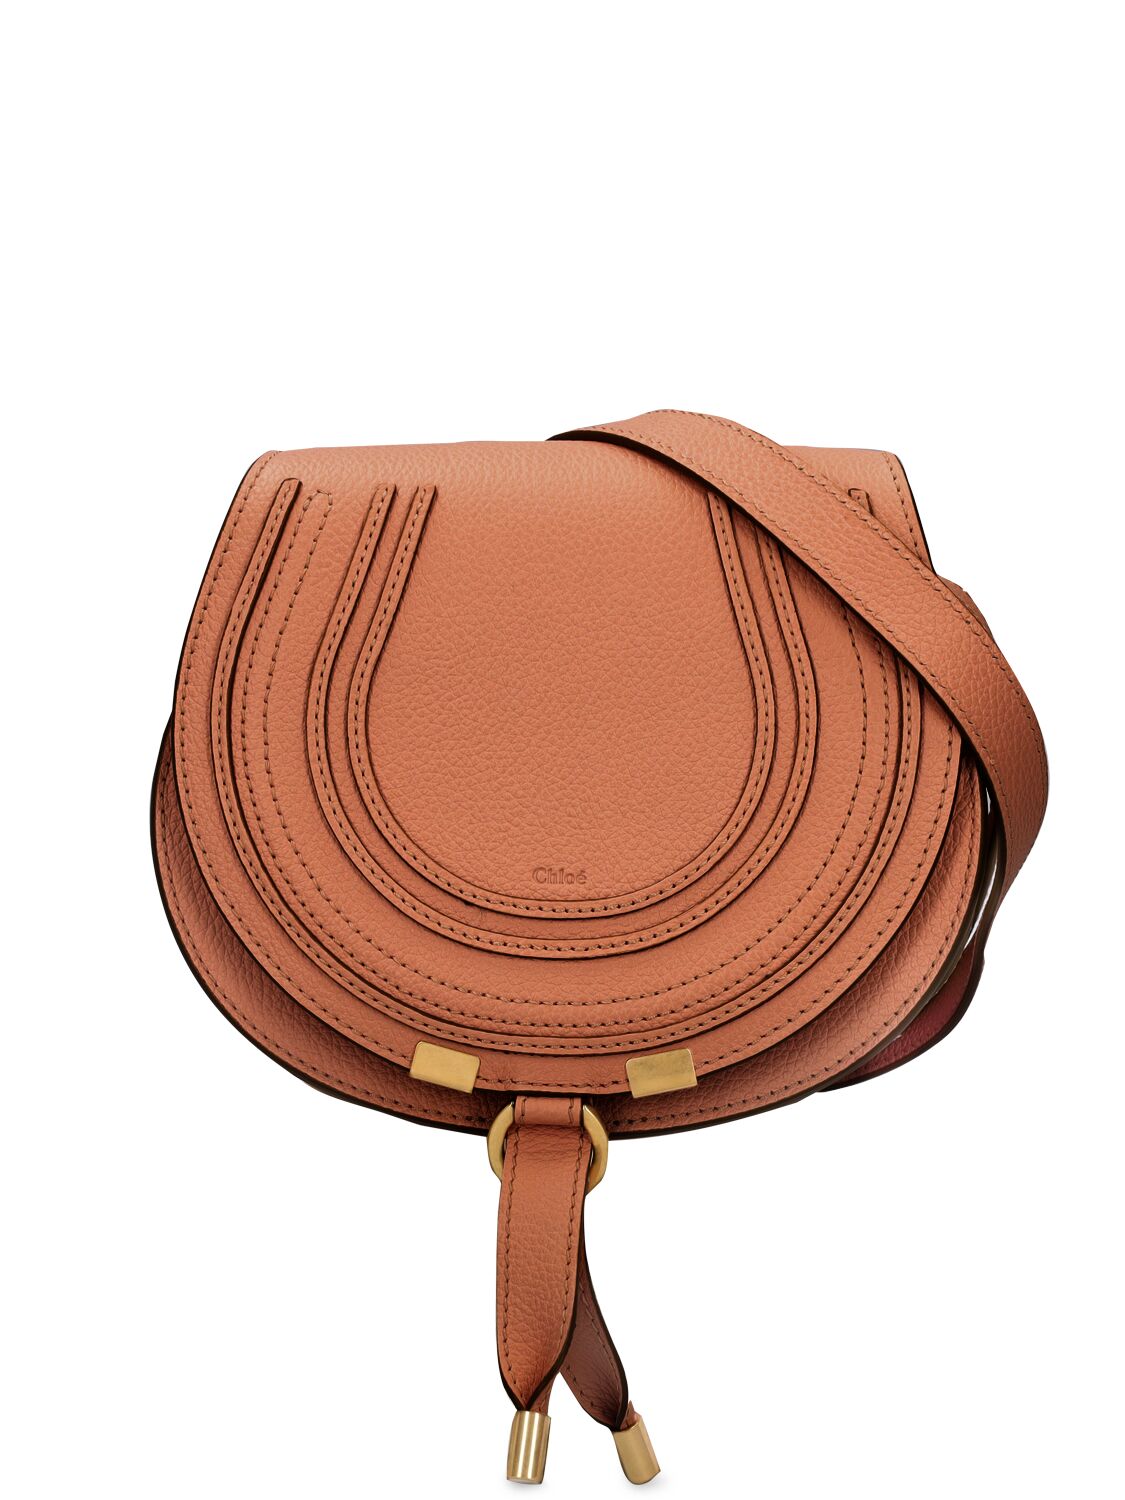 Image of Small Marcie Leather Shoulder Bag